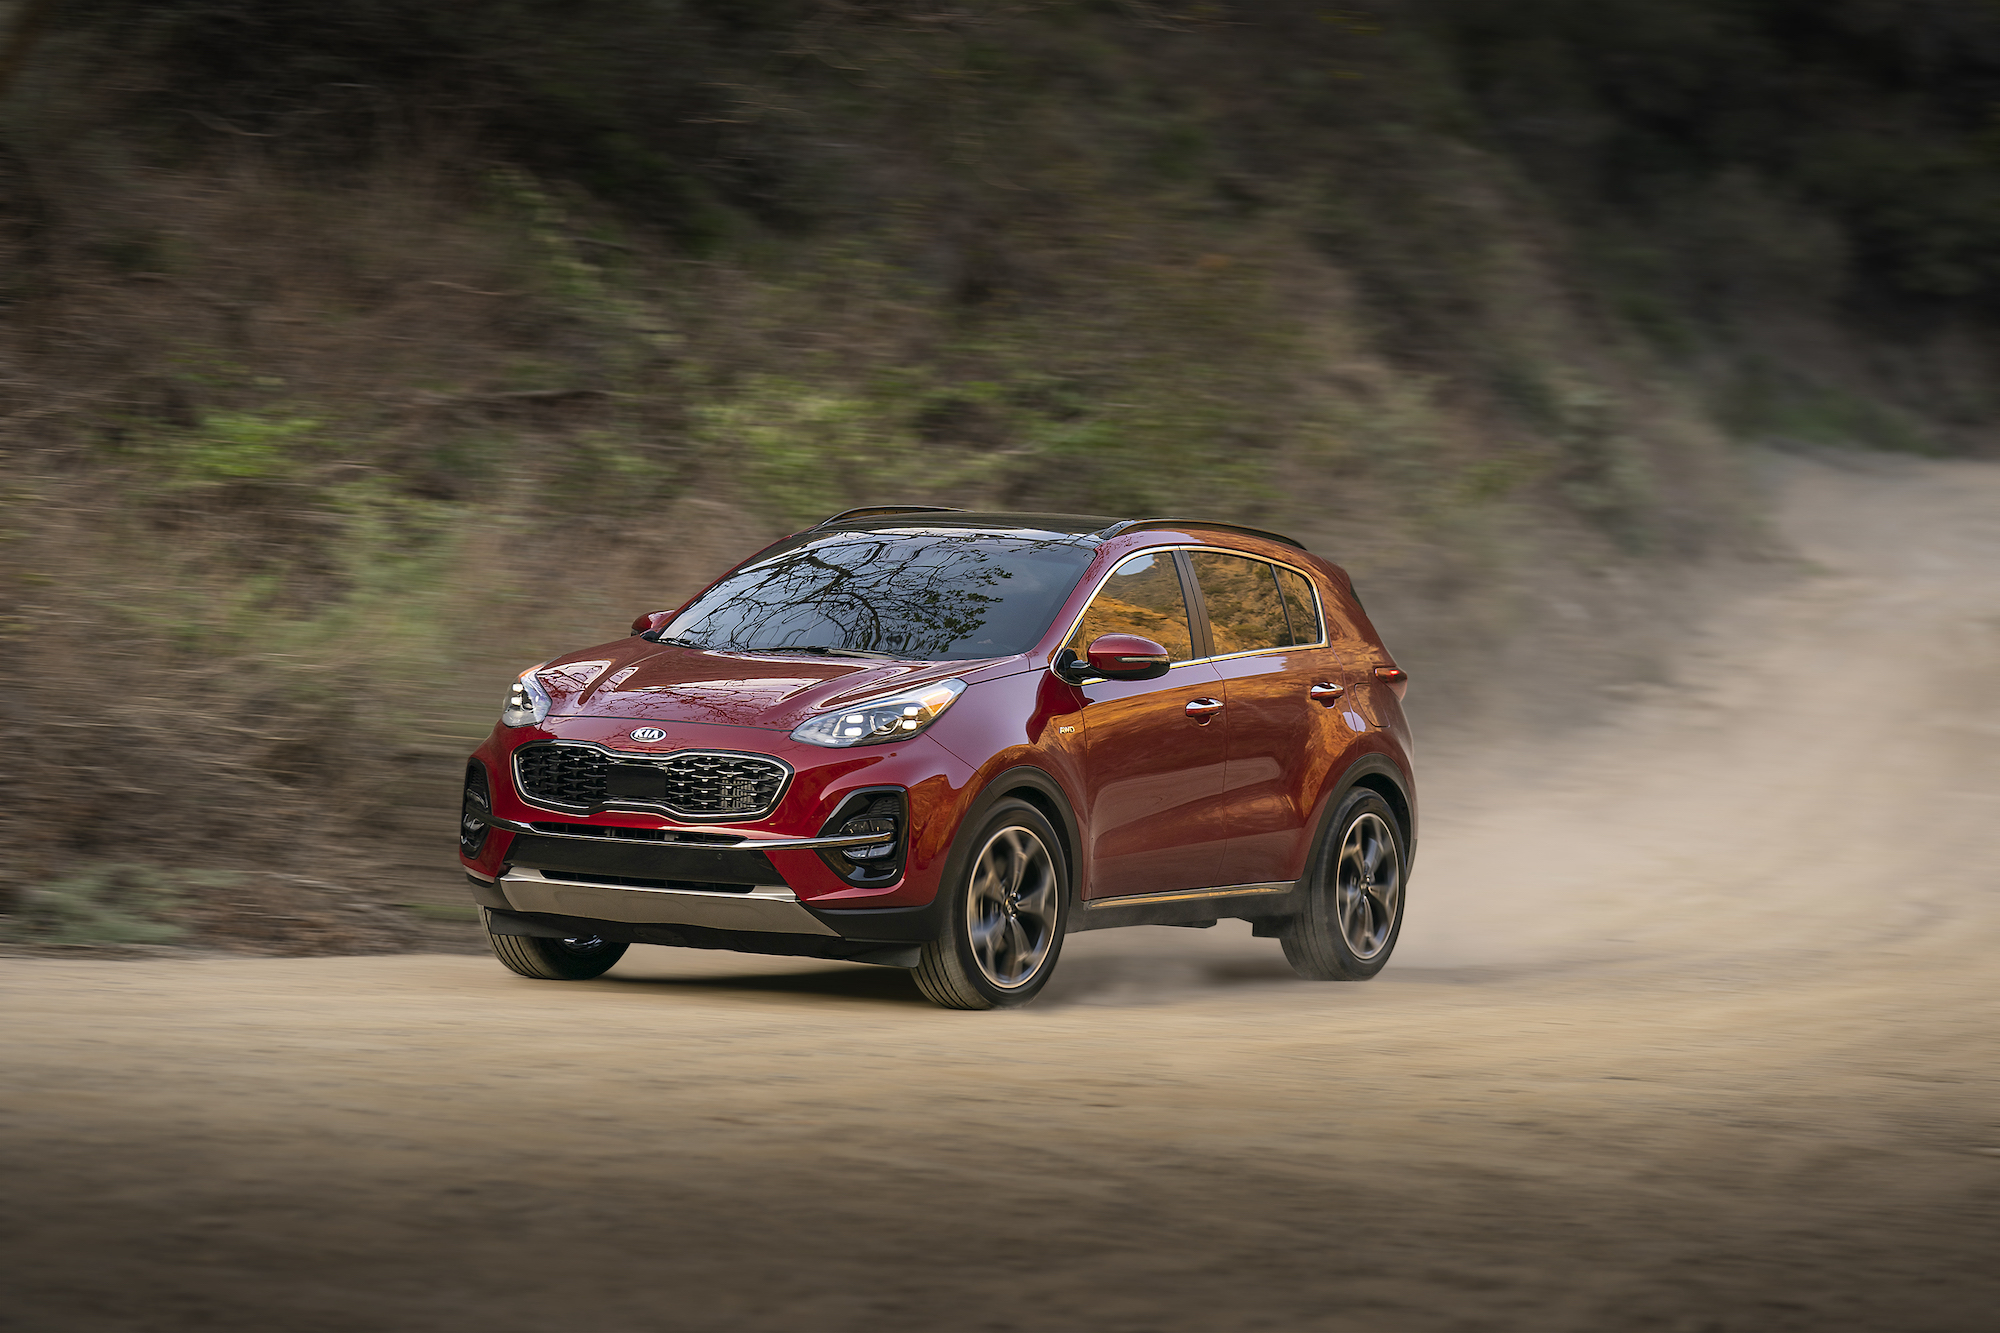 A red 2021 Kia Sportage compact SUV traveling on a dusty mountain road